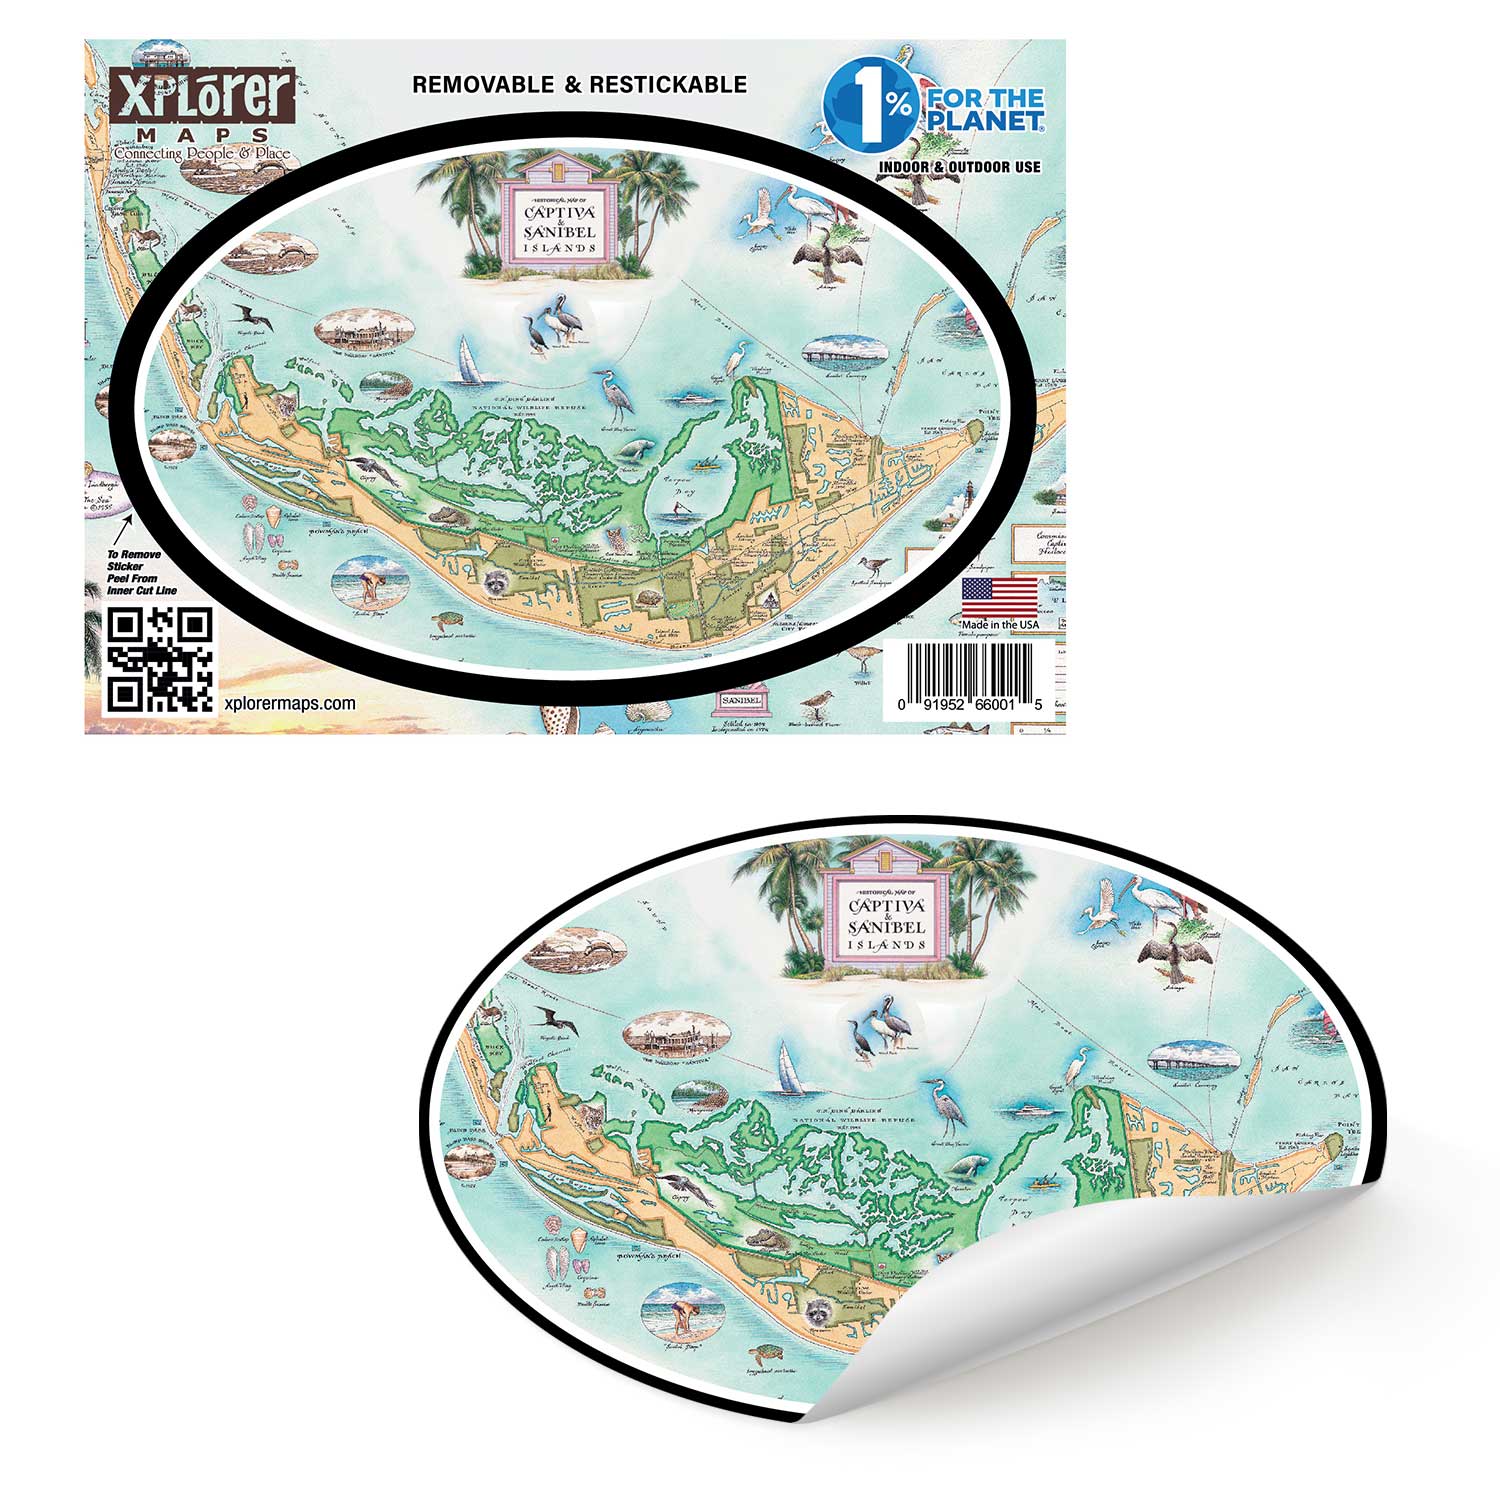 Florida's Sanibel & Captiva Islands Map Sticker by Xplorer Maps. The map features illustrations of places such as Ding Darling Wildlife Sanctuary, Bailey-Matthews Shell Museum, and Sanibel Lighthouse. Flora and fauna include the Loggerhead sea turtle, Manatee, and Great Blue Heron. Many other birds and sea animals are illustrated.